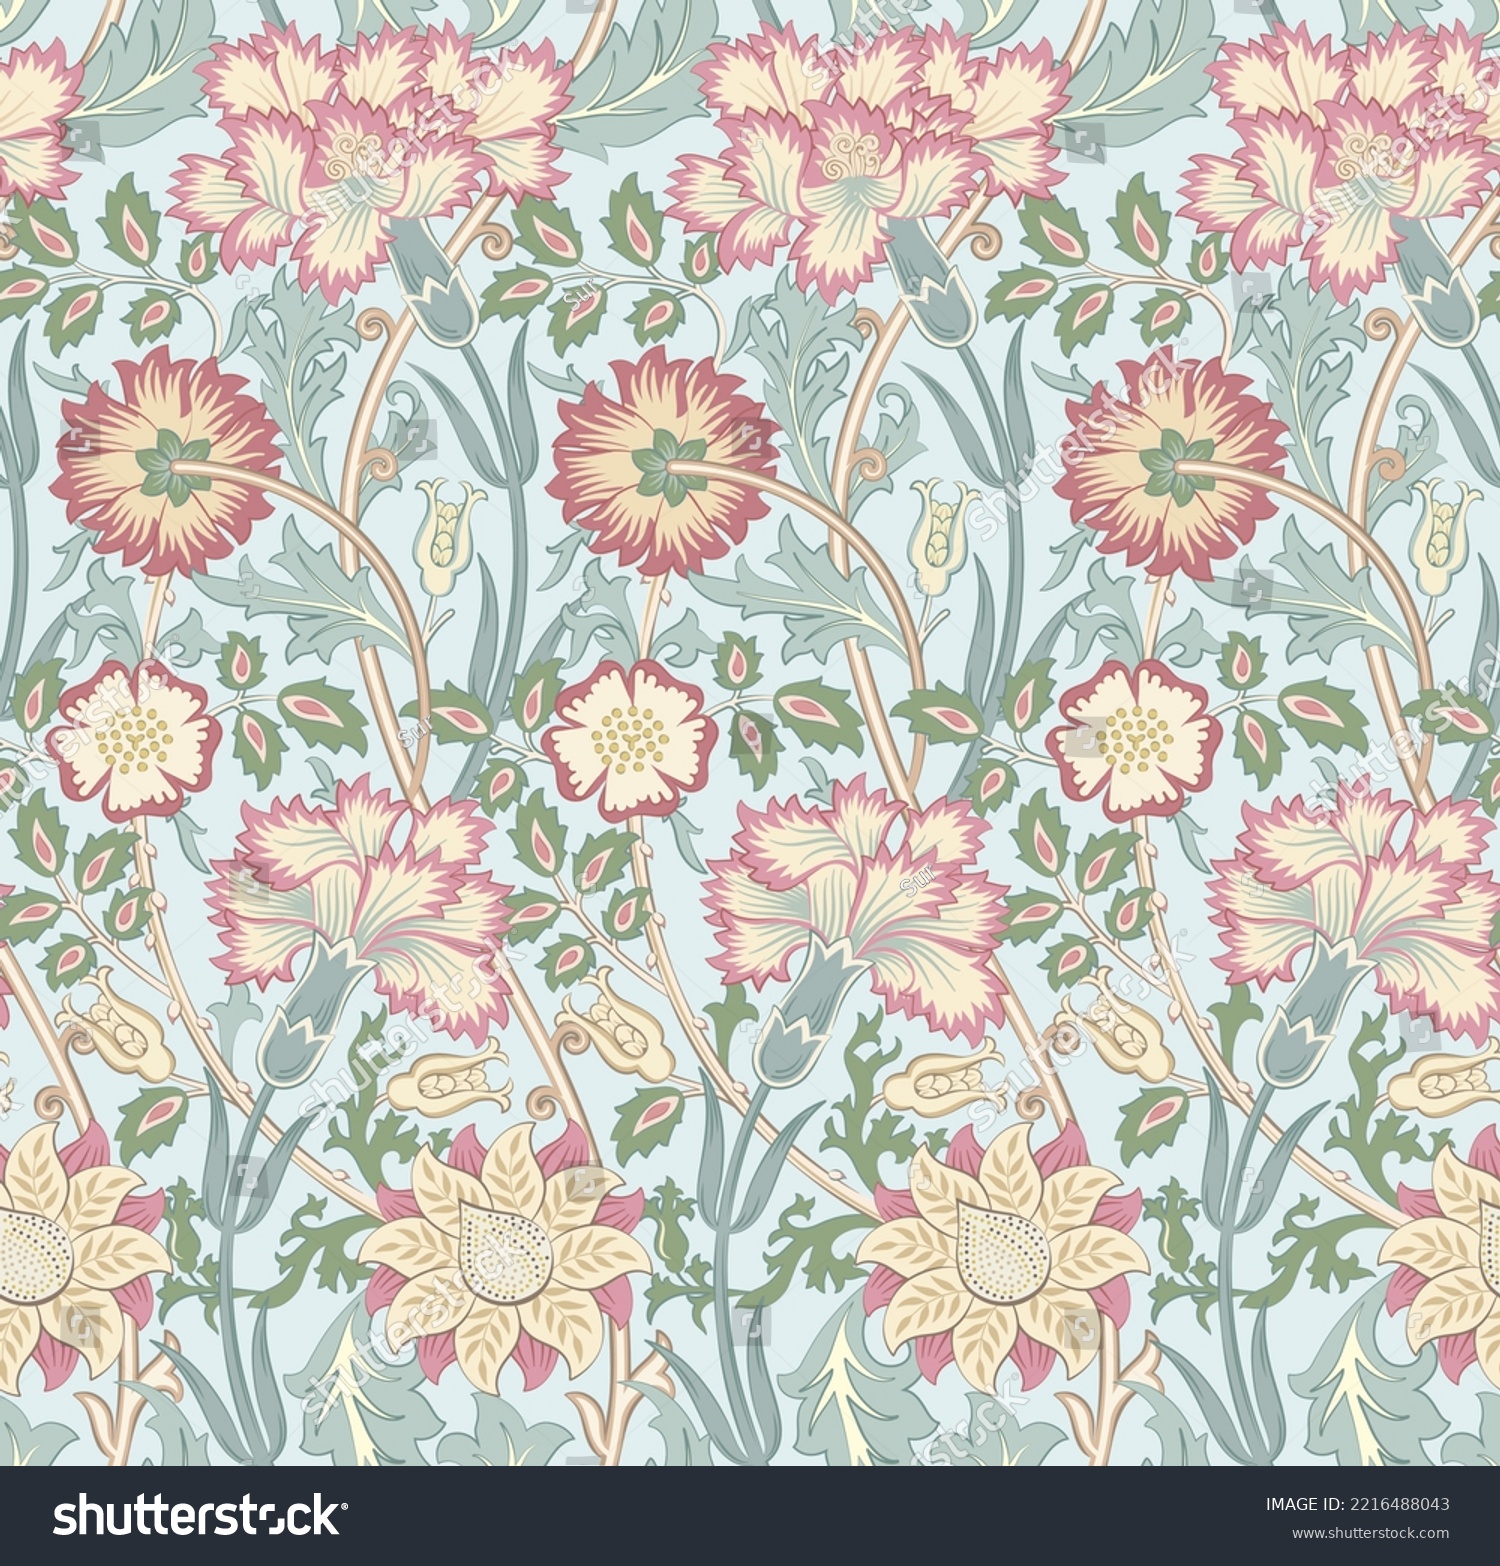 Floral seamless pattern with flowers on light blue background. Vector illustration. #2216488043